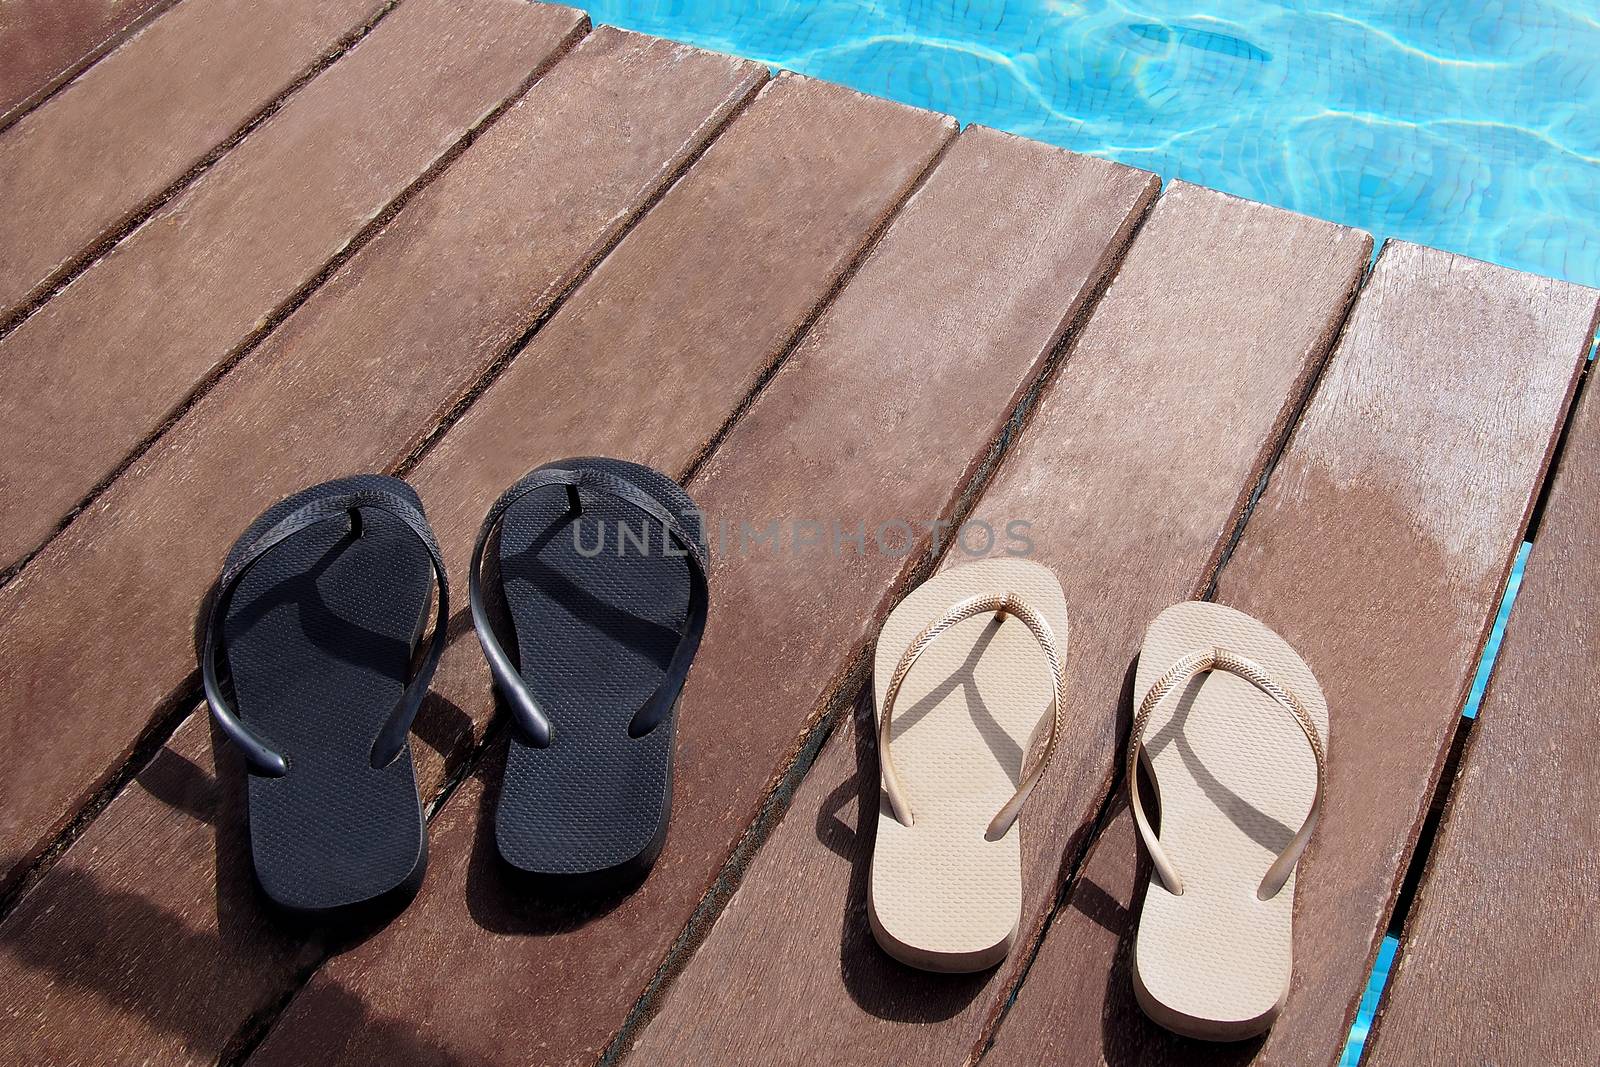 Flip flops at swimming pool from the family